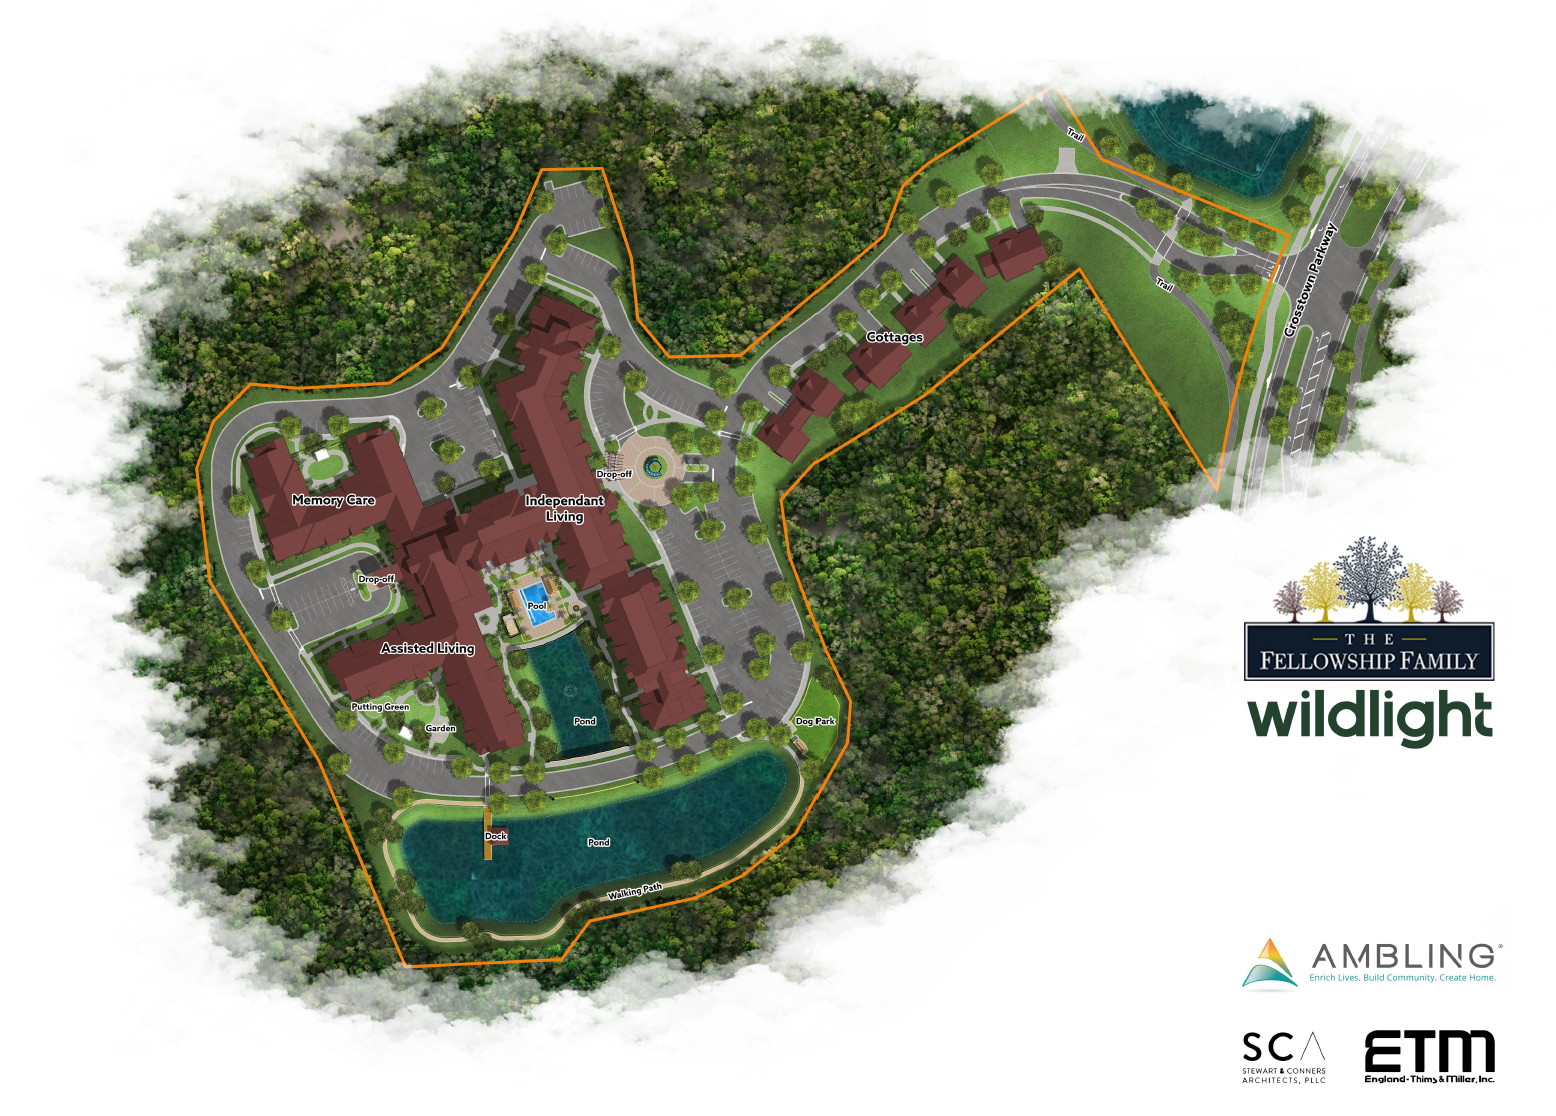 The site plan for Fellowship at Wildlight.